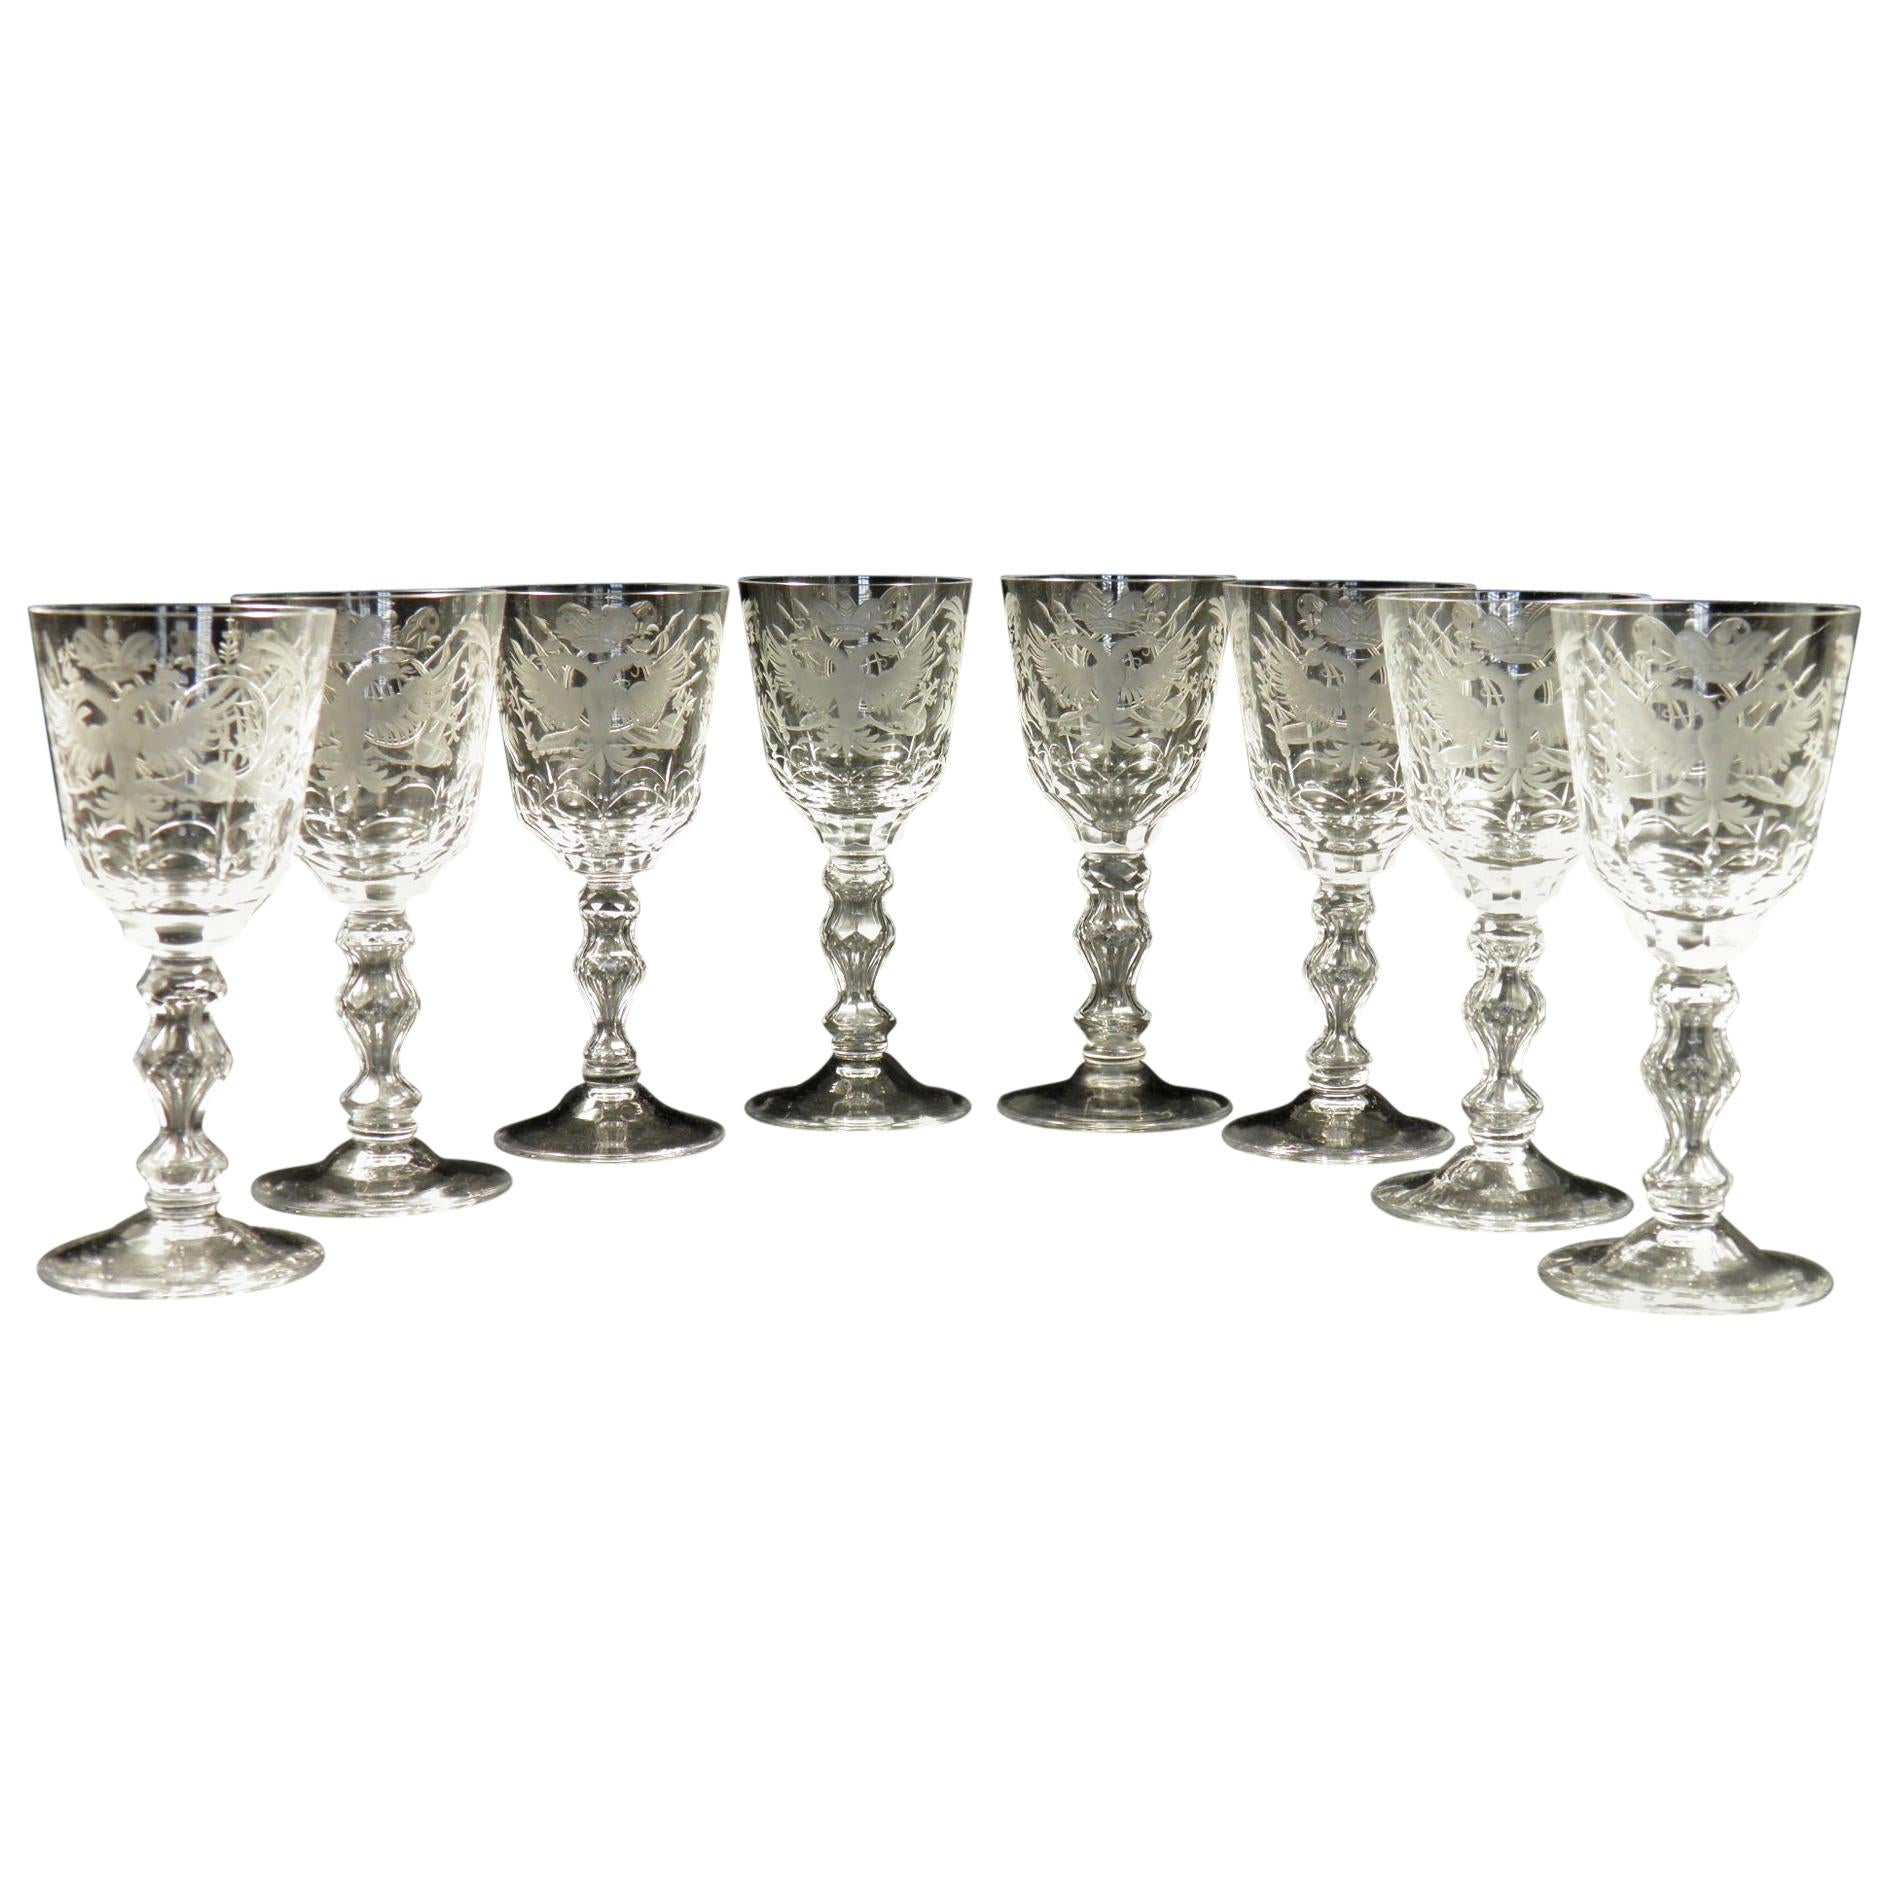 Set of 8 Pieces of Wine Glasses, Tsarist Russian Glass of the 20th Century